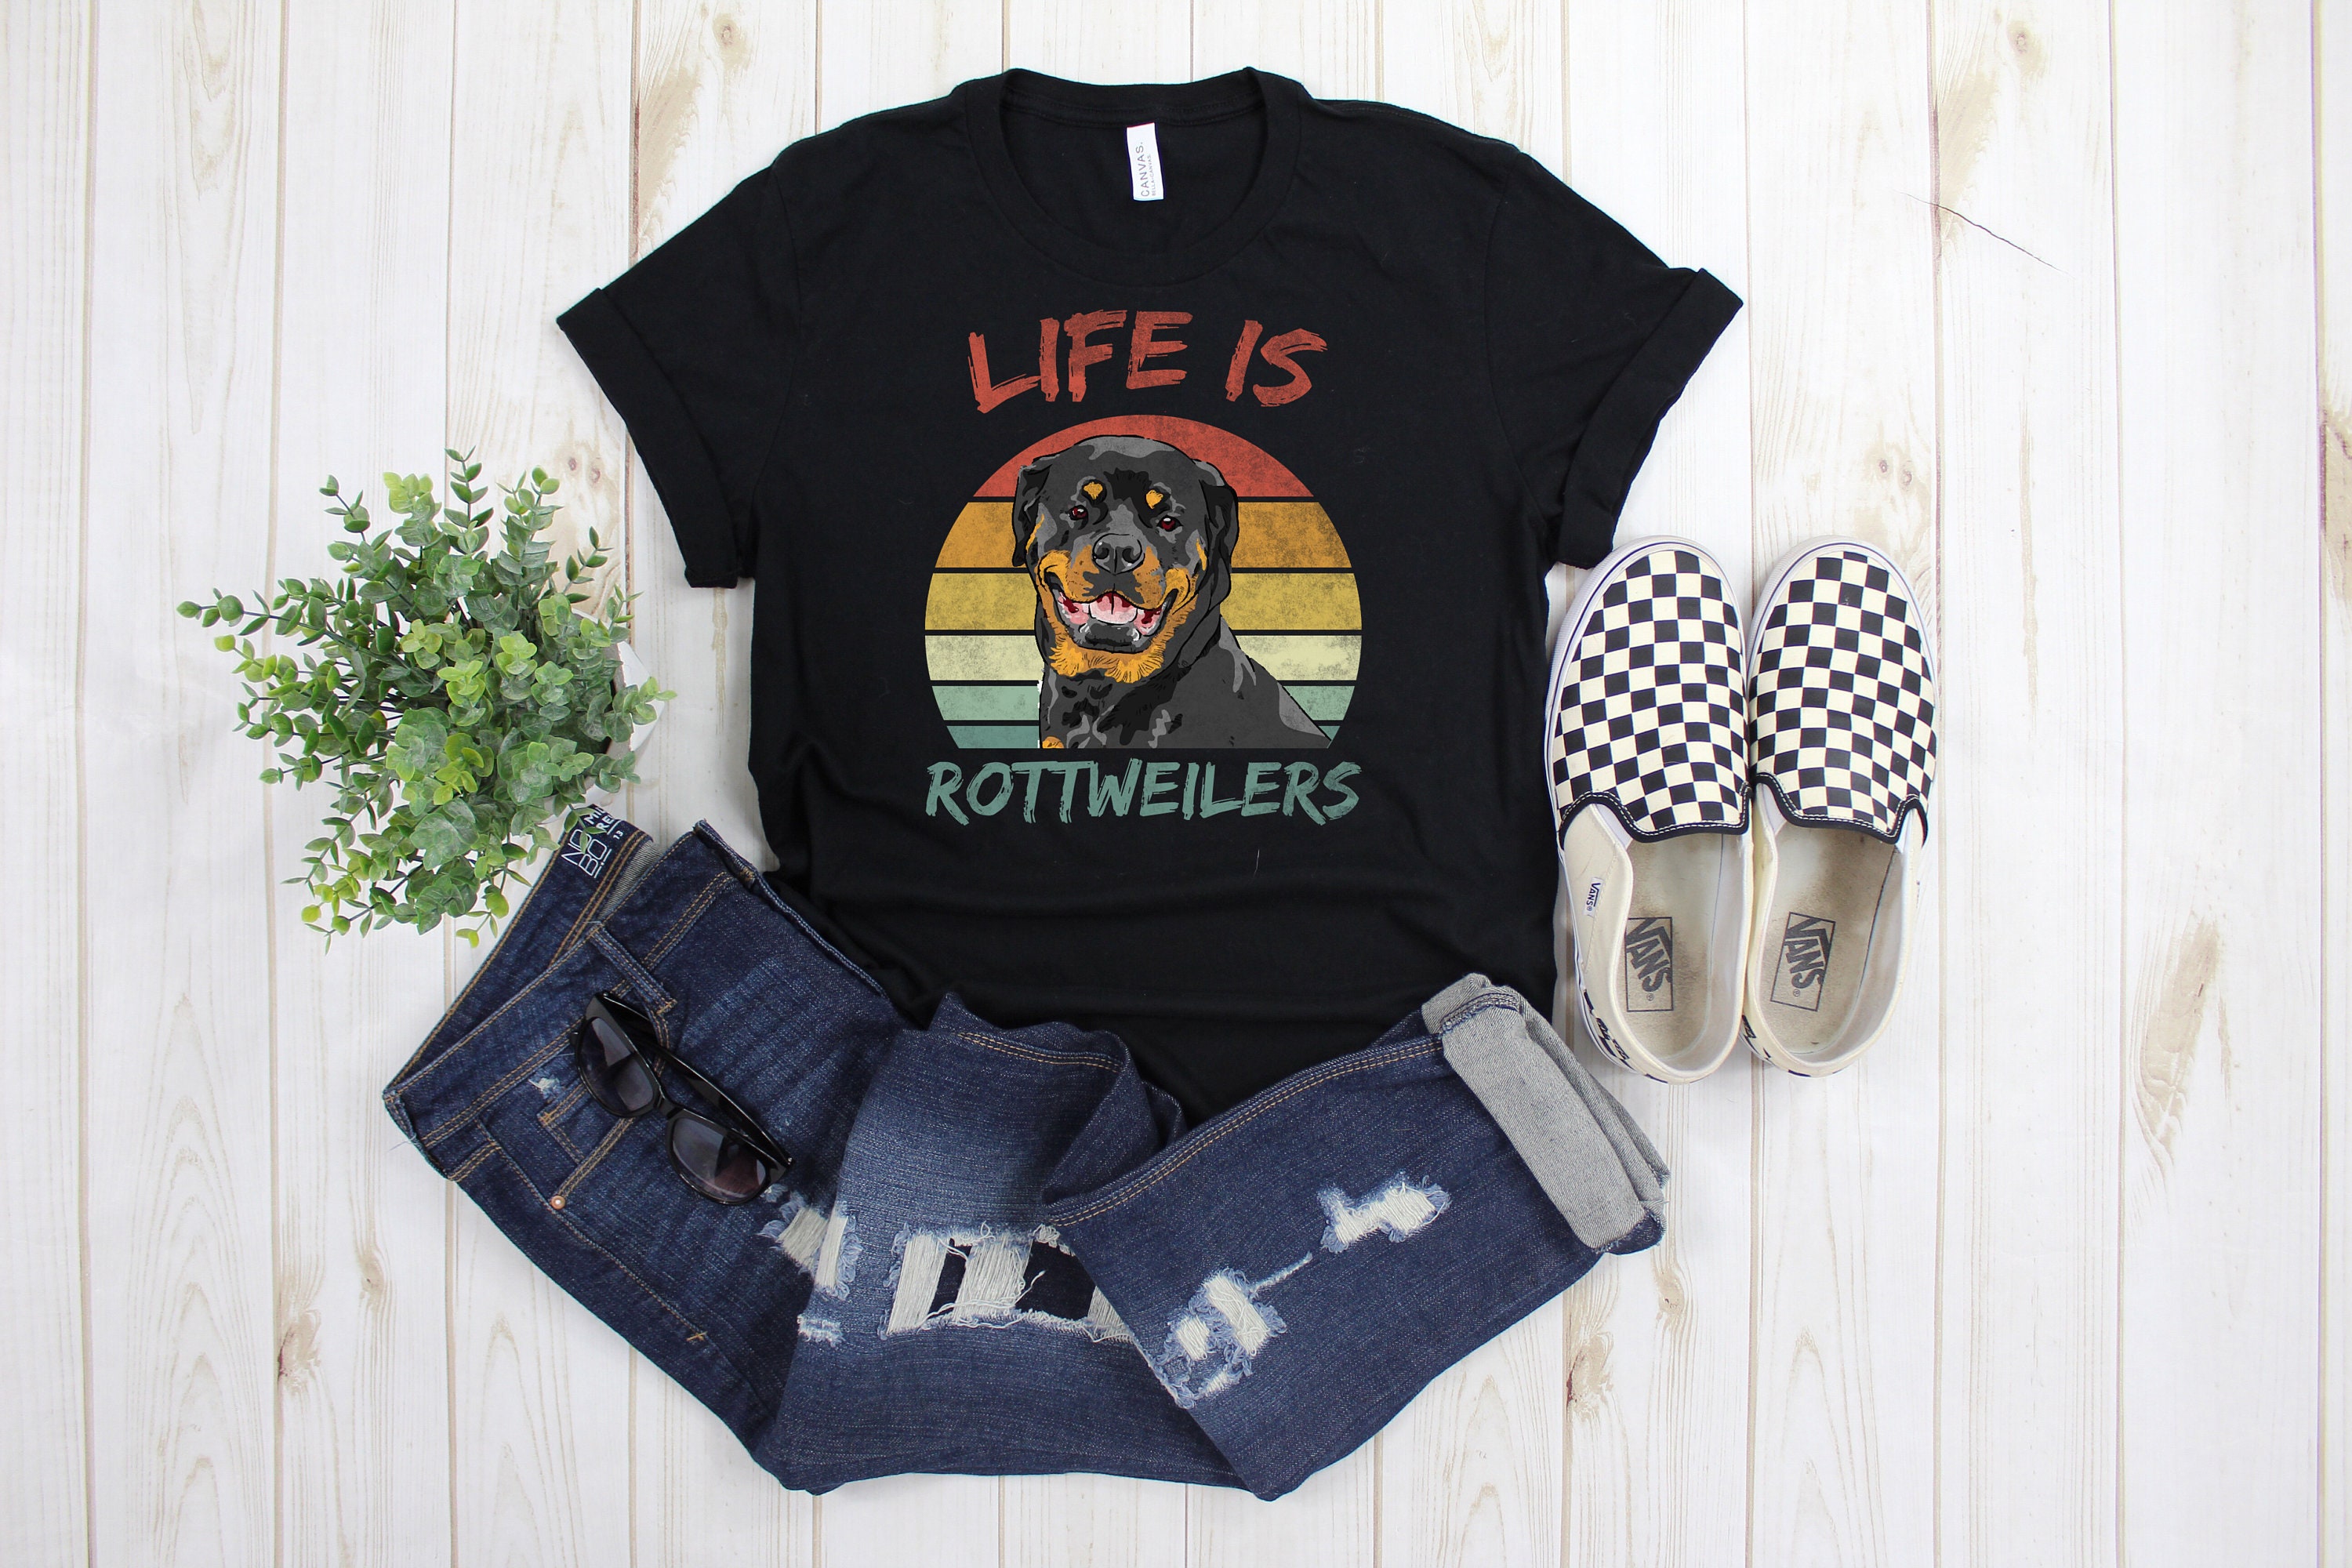 Discover Life s Rottweilers T-Shirt - Rottweiler Retriever Tee - Gift For Animal Lovers - Rottweiler Dog Lover Tee -Gift For Rottweiler Owner Shirt